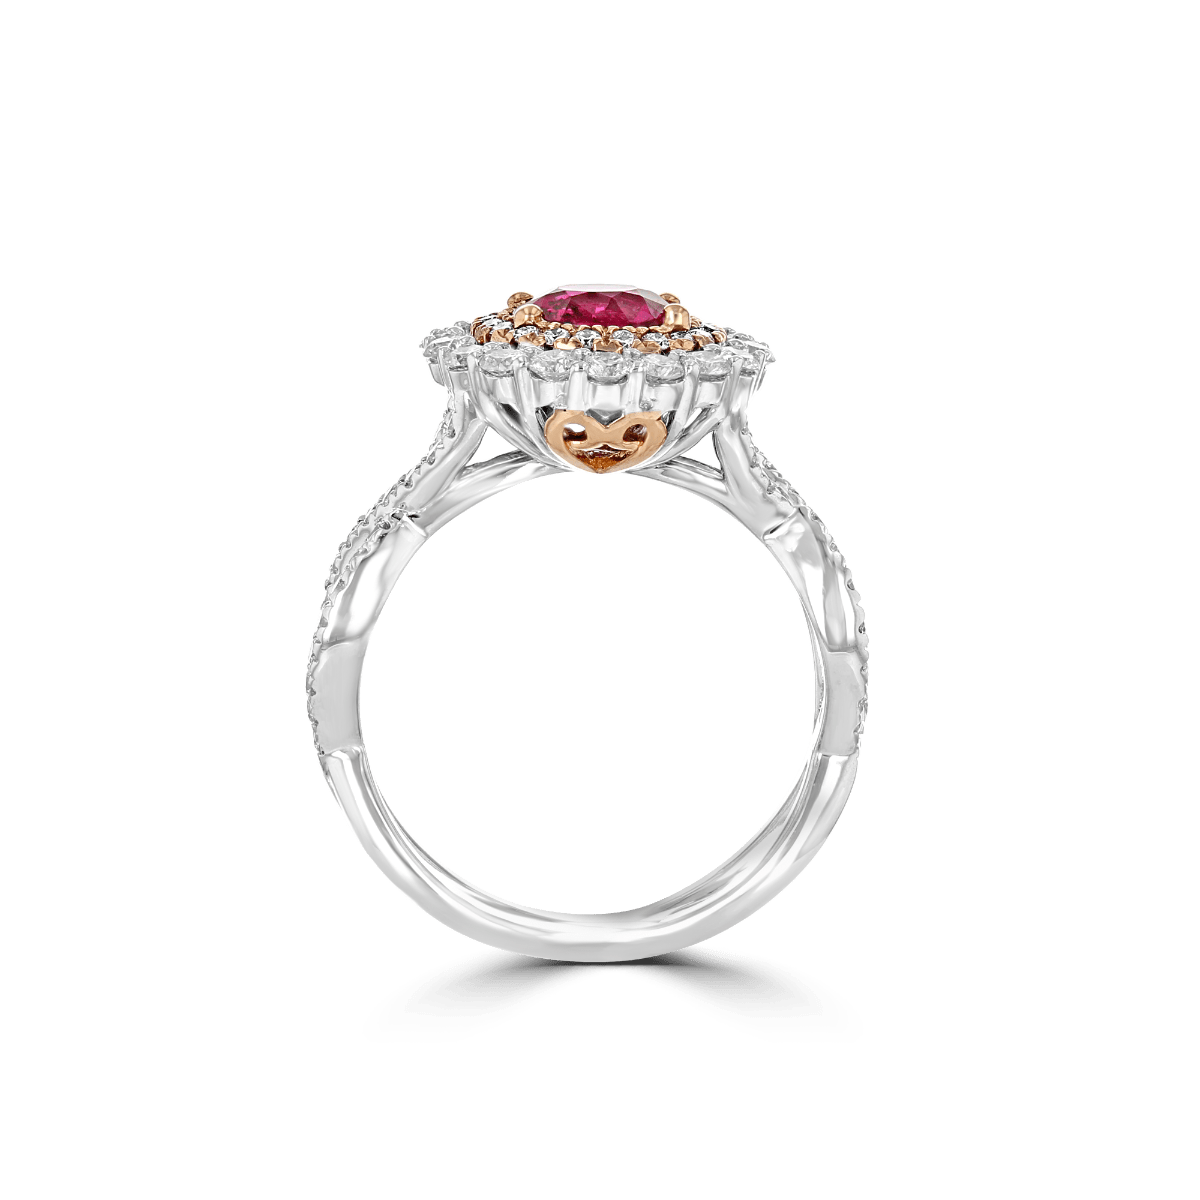 JULEVE 18KT 1.25 CT RUBY & .91 CTW DIAMOND DOUBLE HALO RING 4,4.5,5,5.5,6,6.5,7,7.5,8,8.5,9